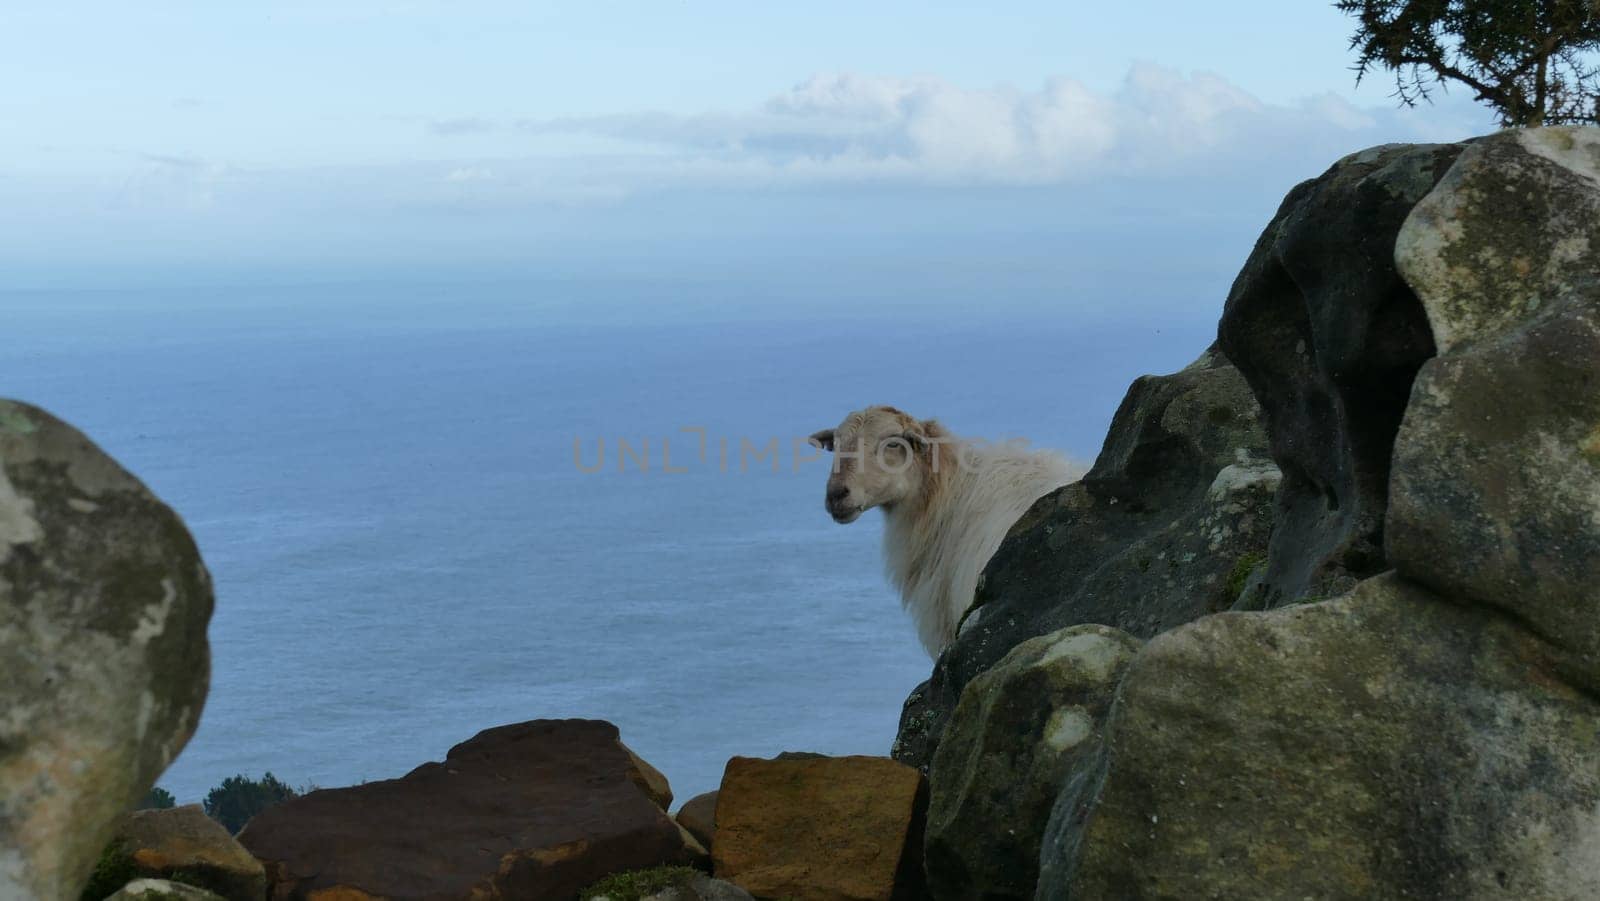 Sheep observing on top of a mountain by the sea shore by XabiDonostia